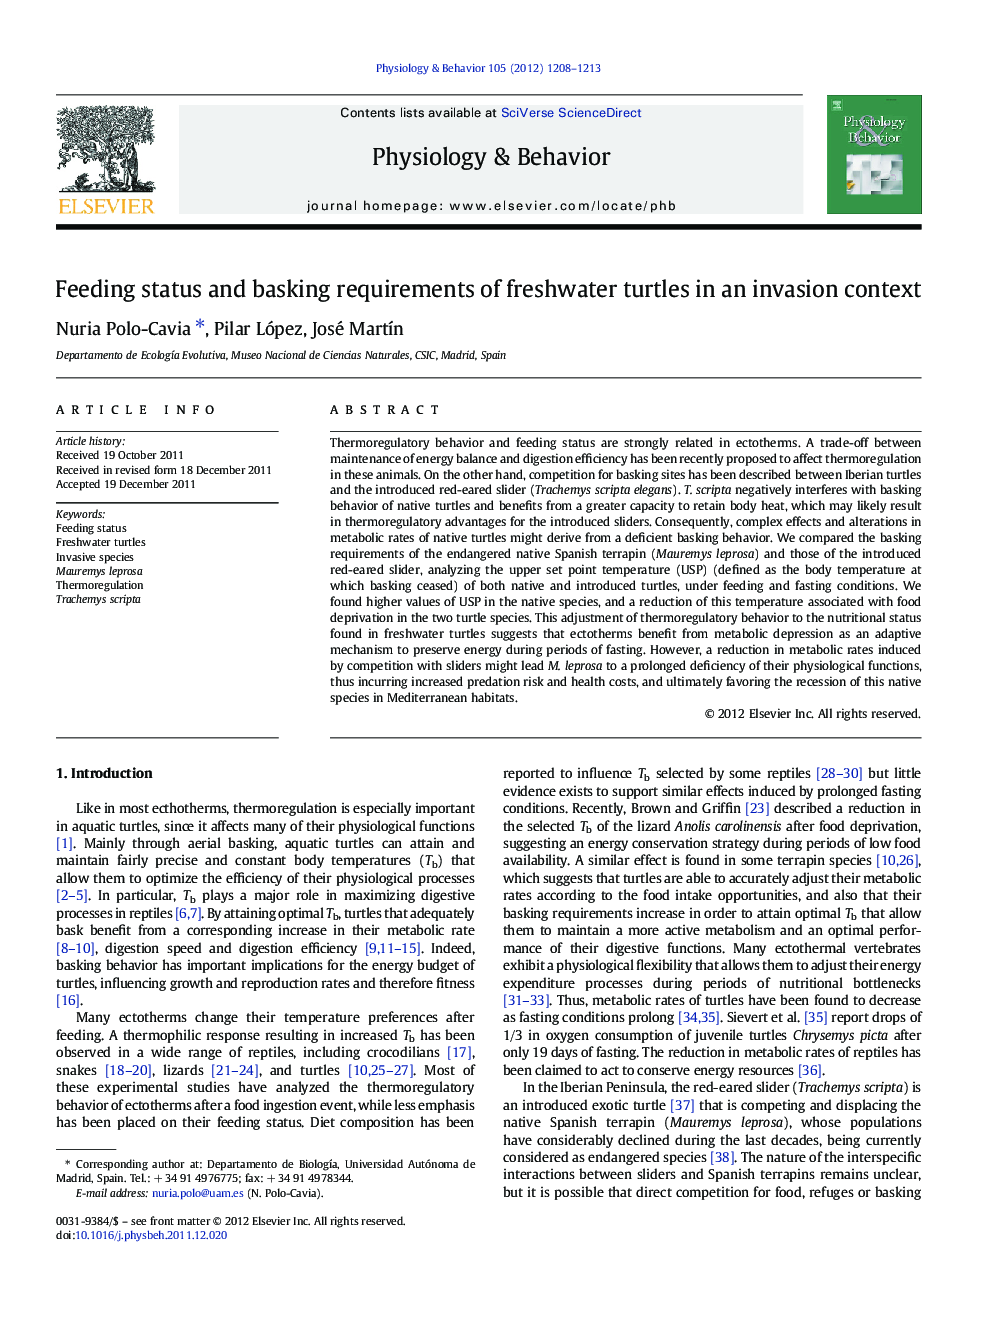 Feeding status and basking requirements of freshwater turtles in an invasion context